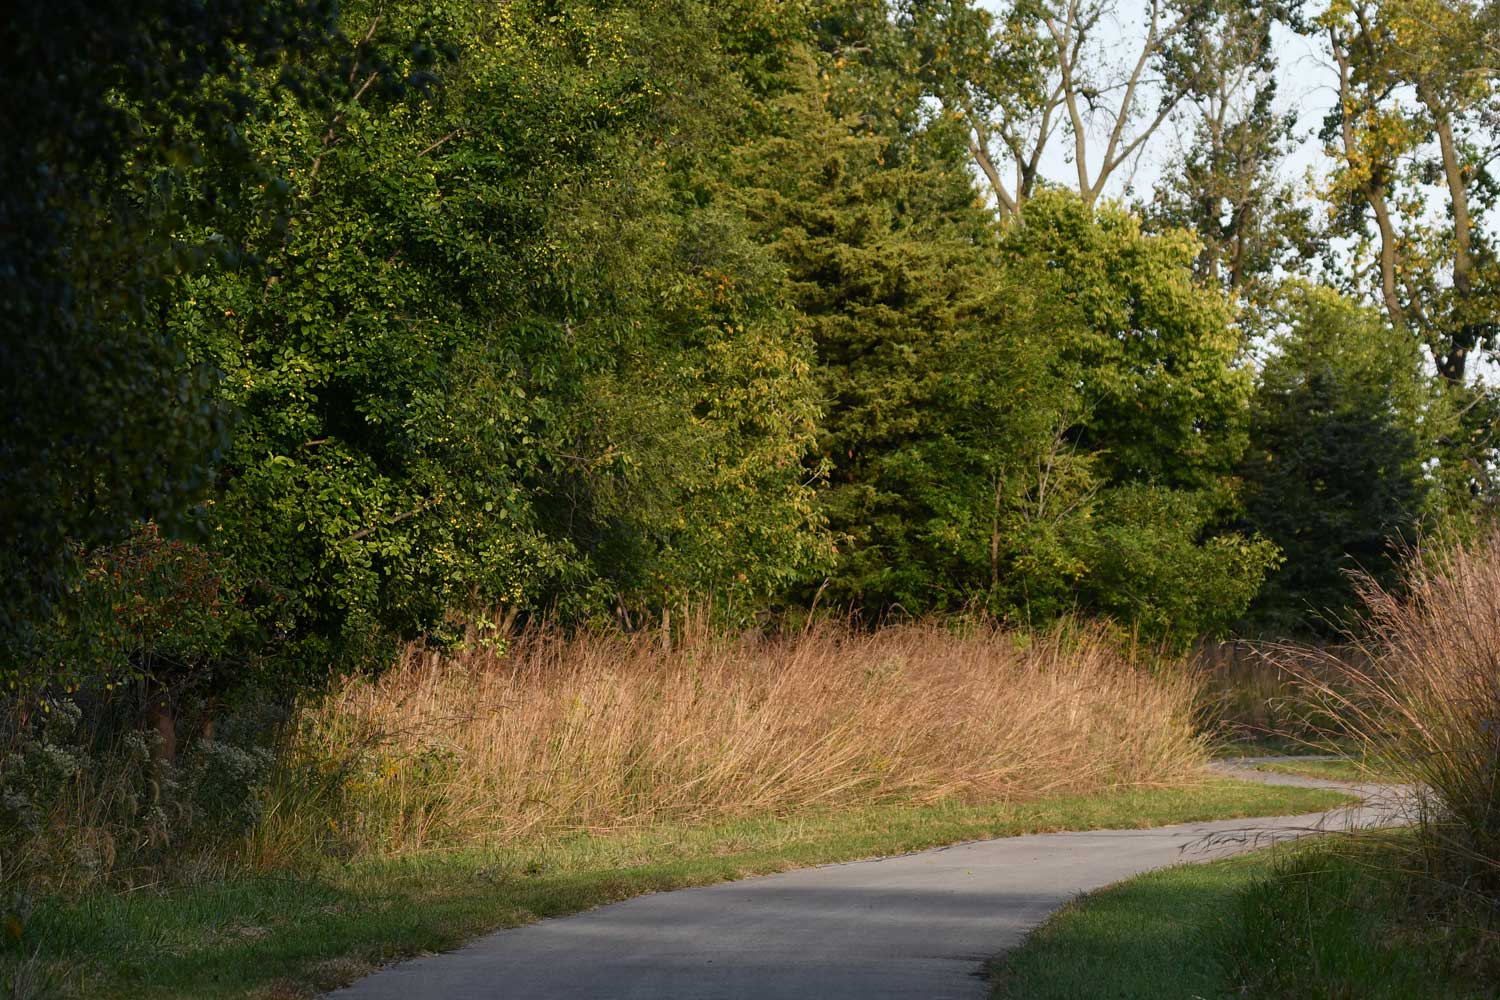 Paved trail lined with grasses and trees.